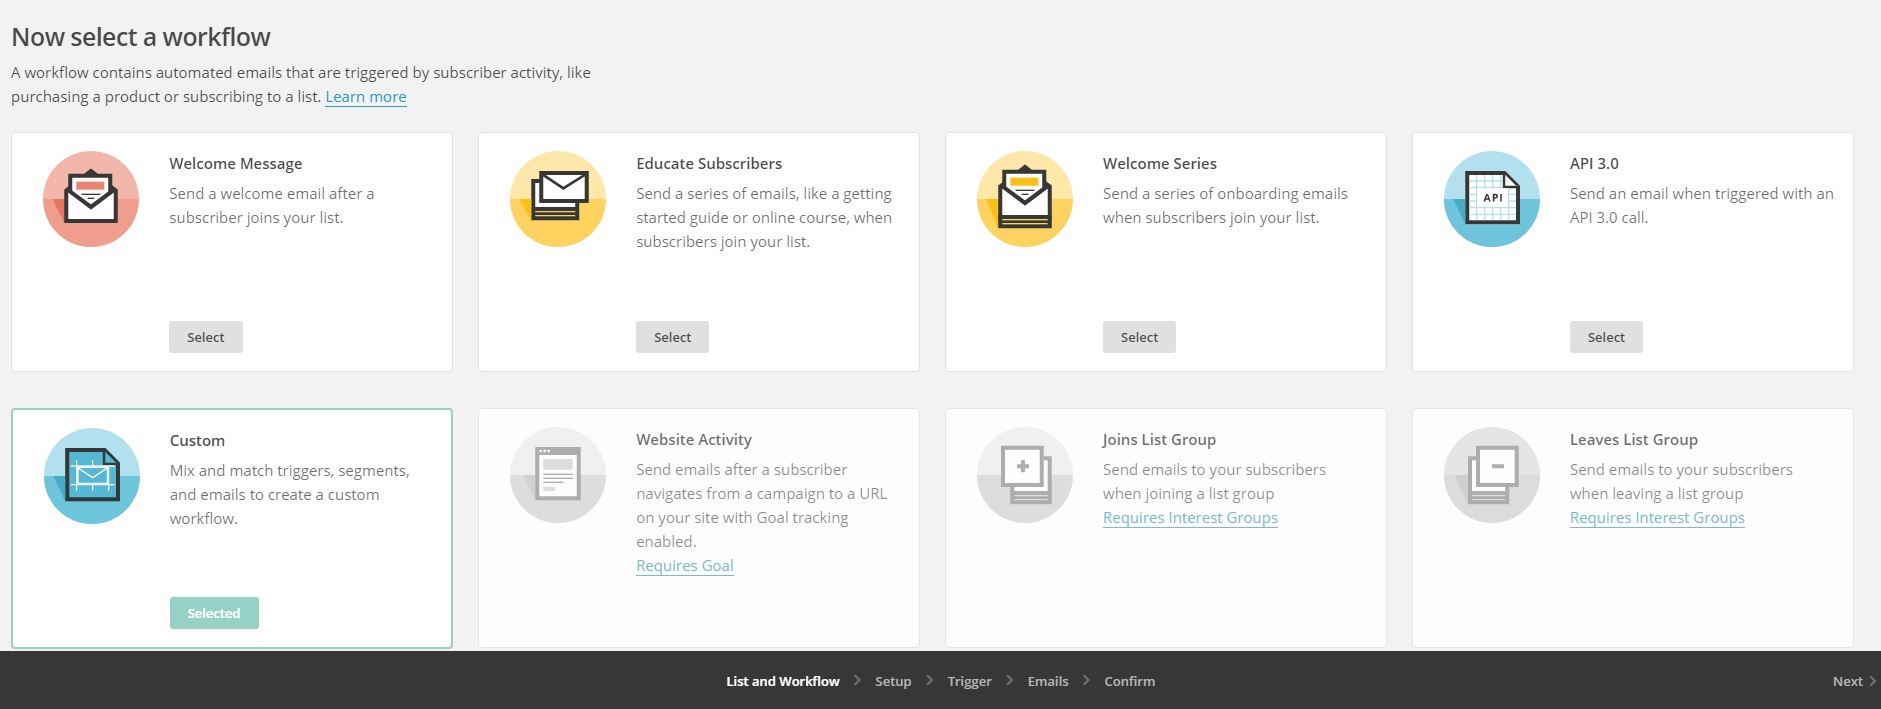 MailChimp Automation Workflow Welcome Series Selection